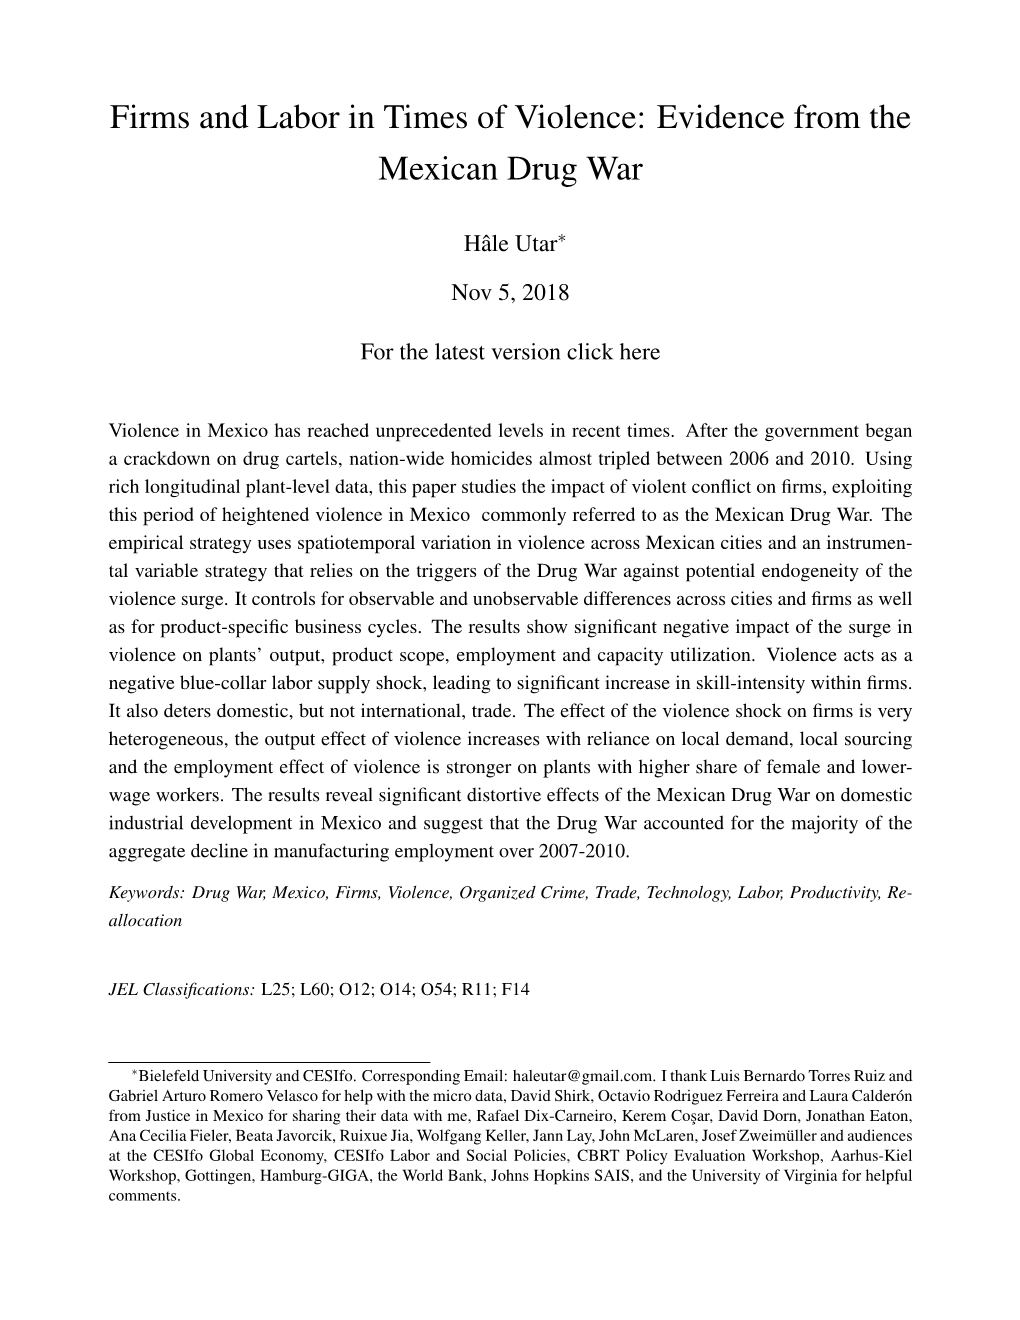 Firms and Labor in Times of Violence: Evidence from the Mexican Drug War